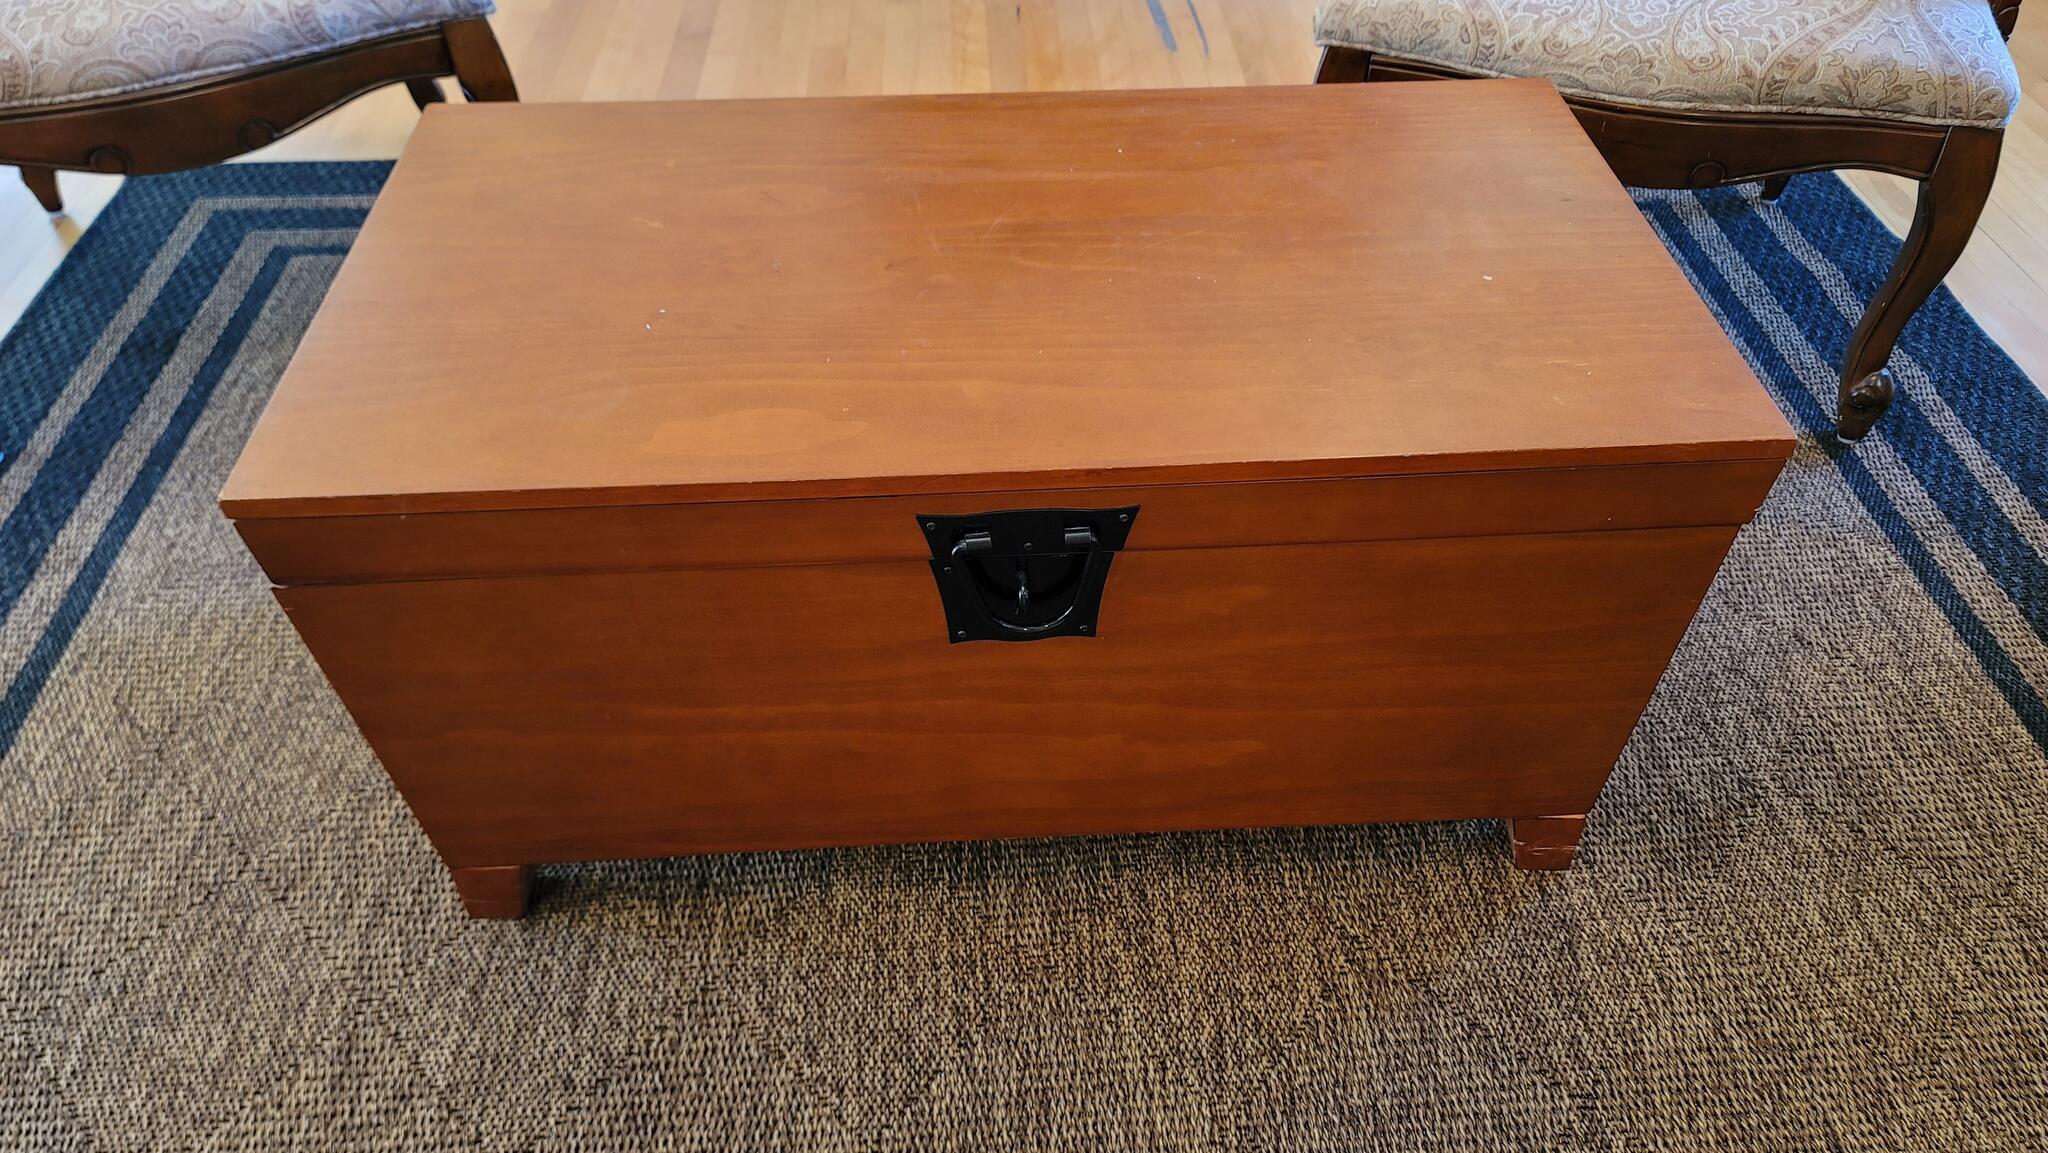 Pyramid Cocktail Table Trunk - Mission Oak